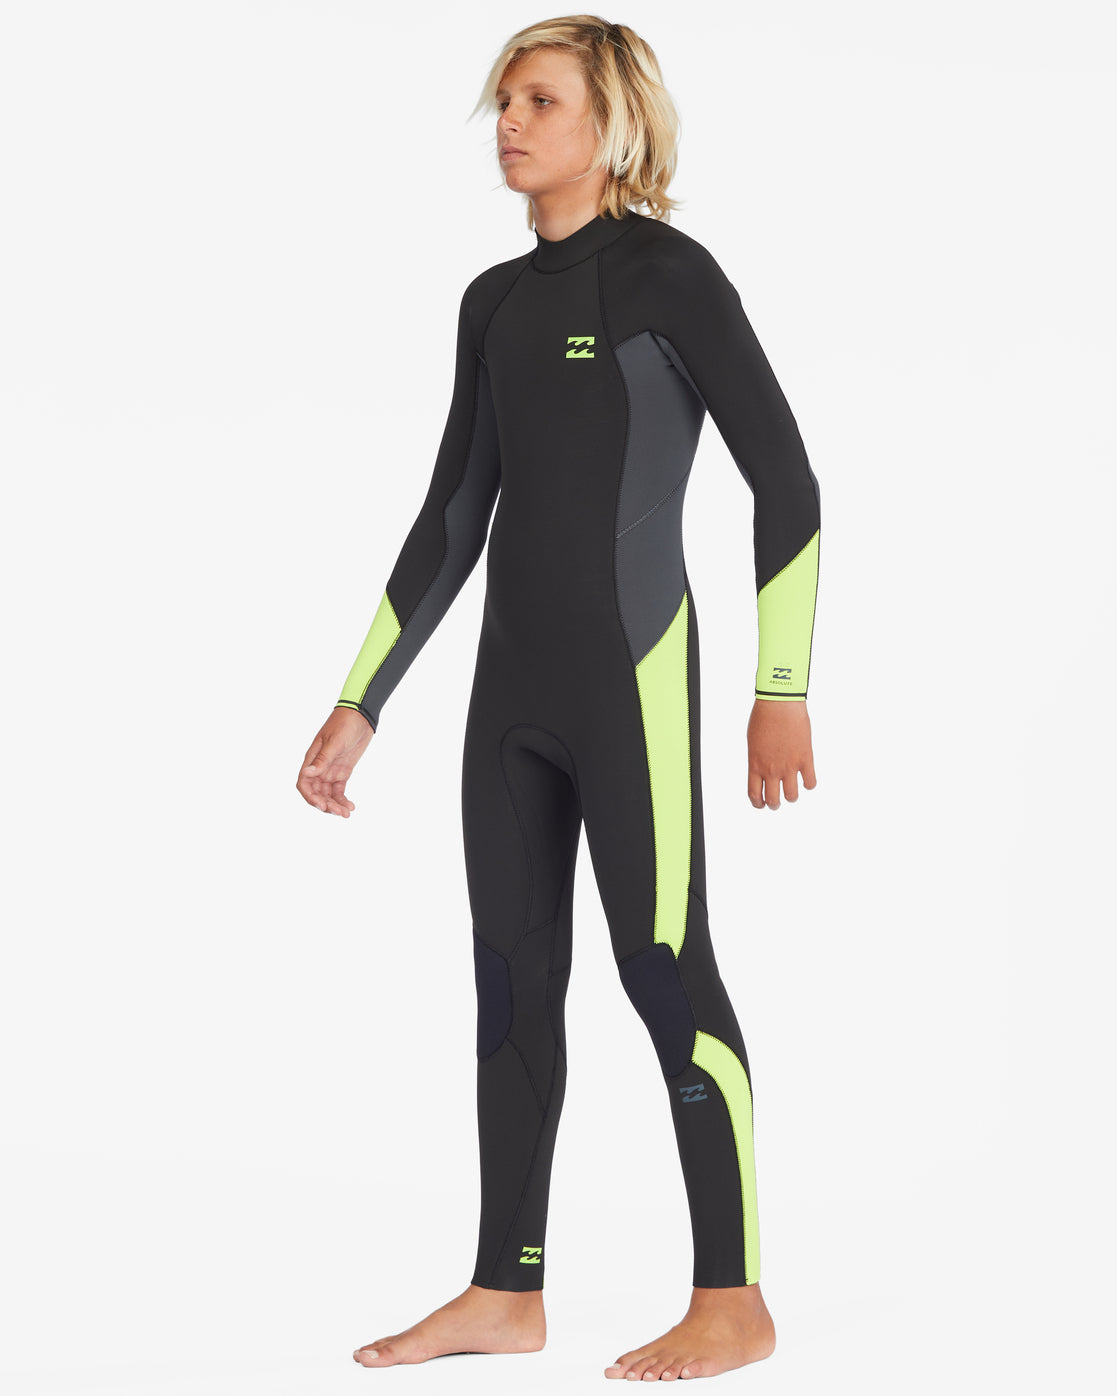 Billabong Absolute BZ GBS Boys 3/2mm Wetsuit stealth colourway side view